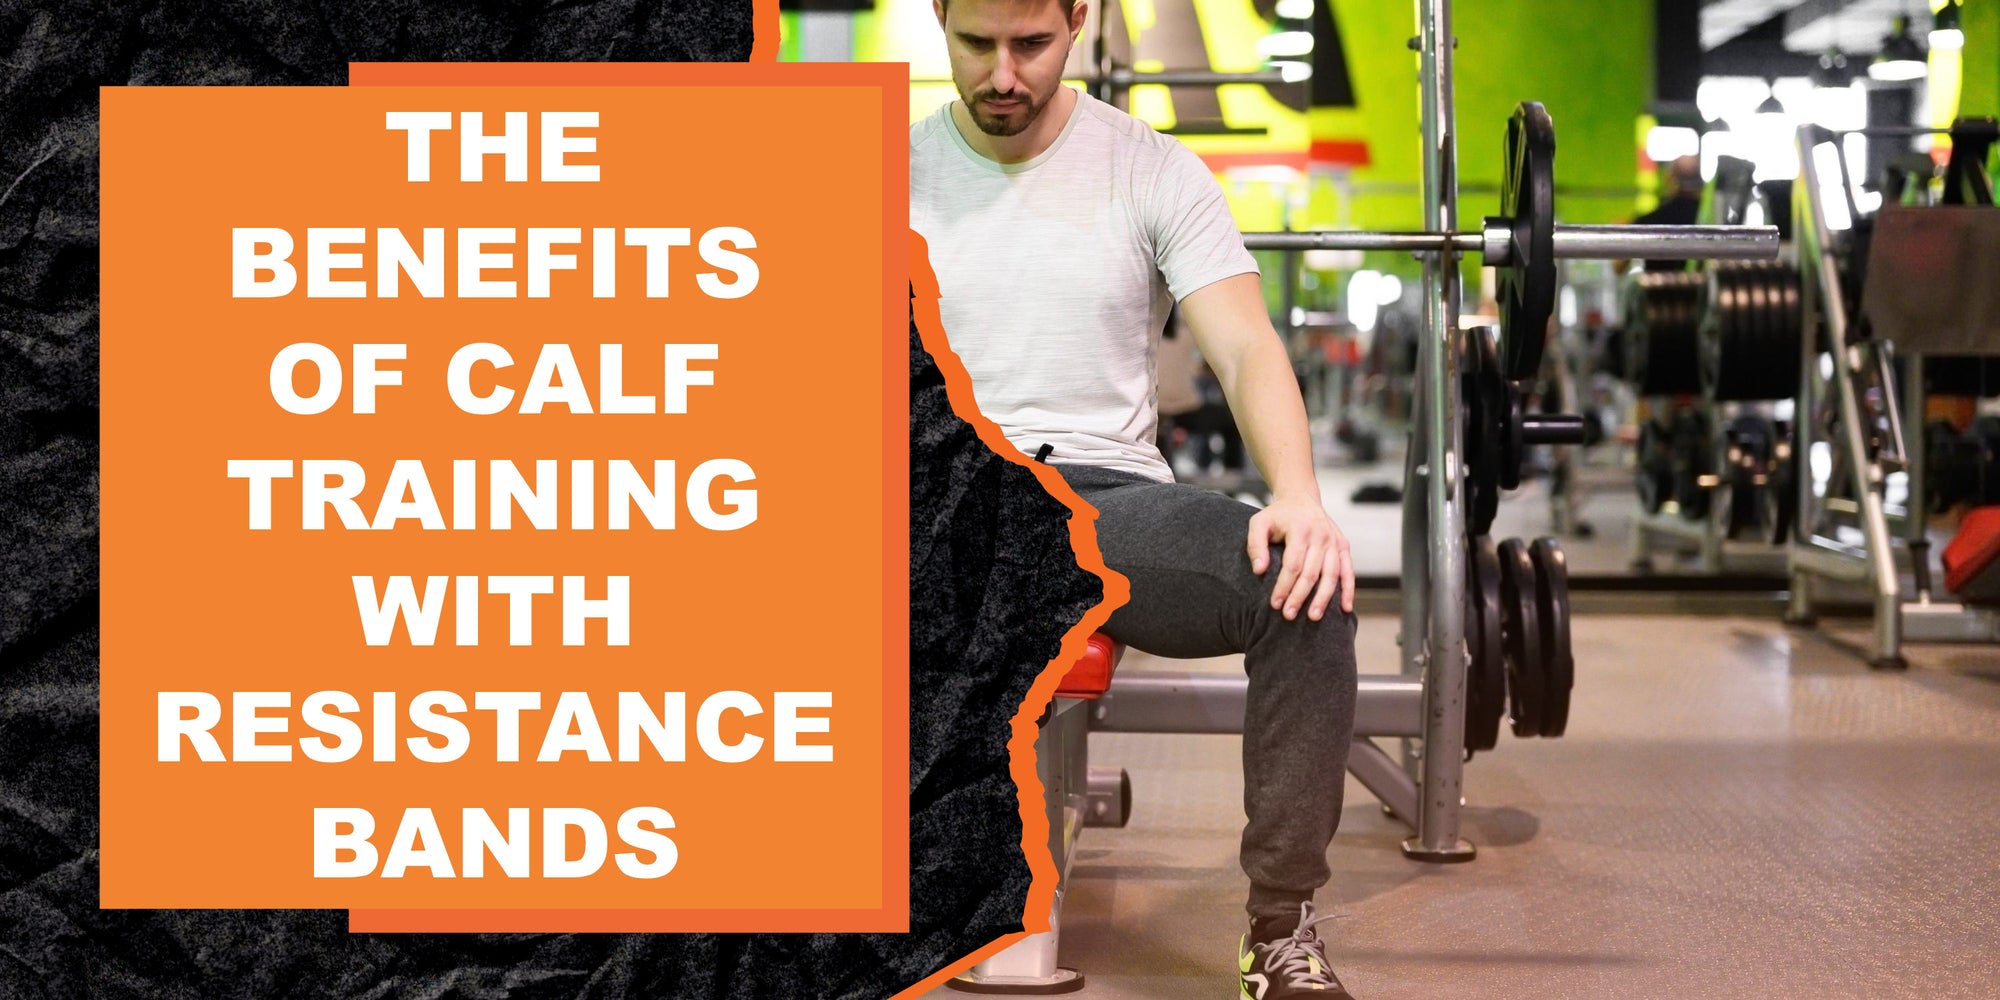 The Benefits of Calf Training with Resistance Bands